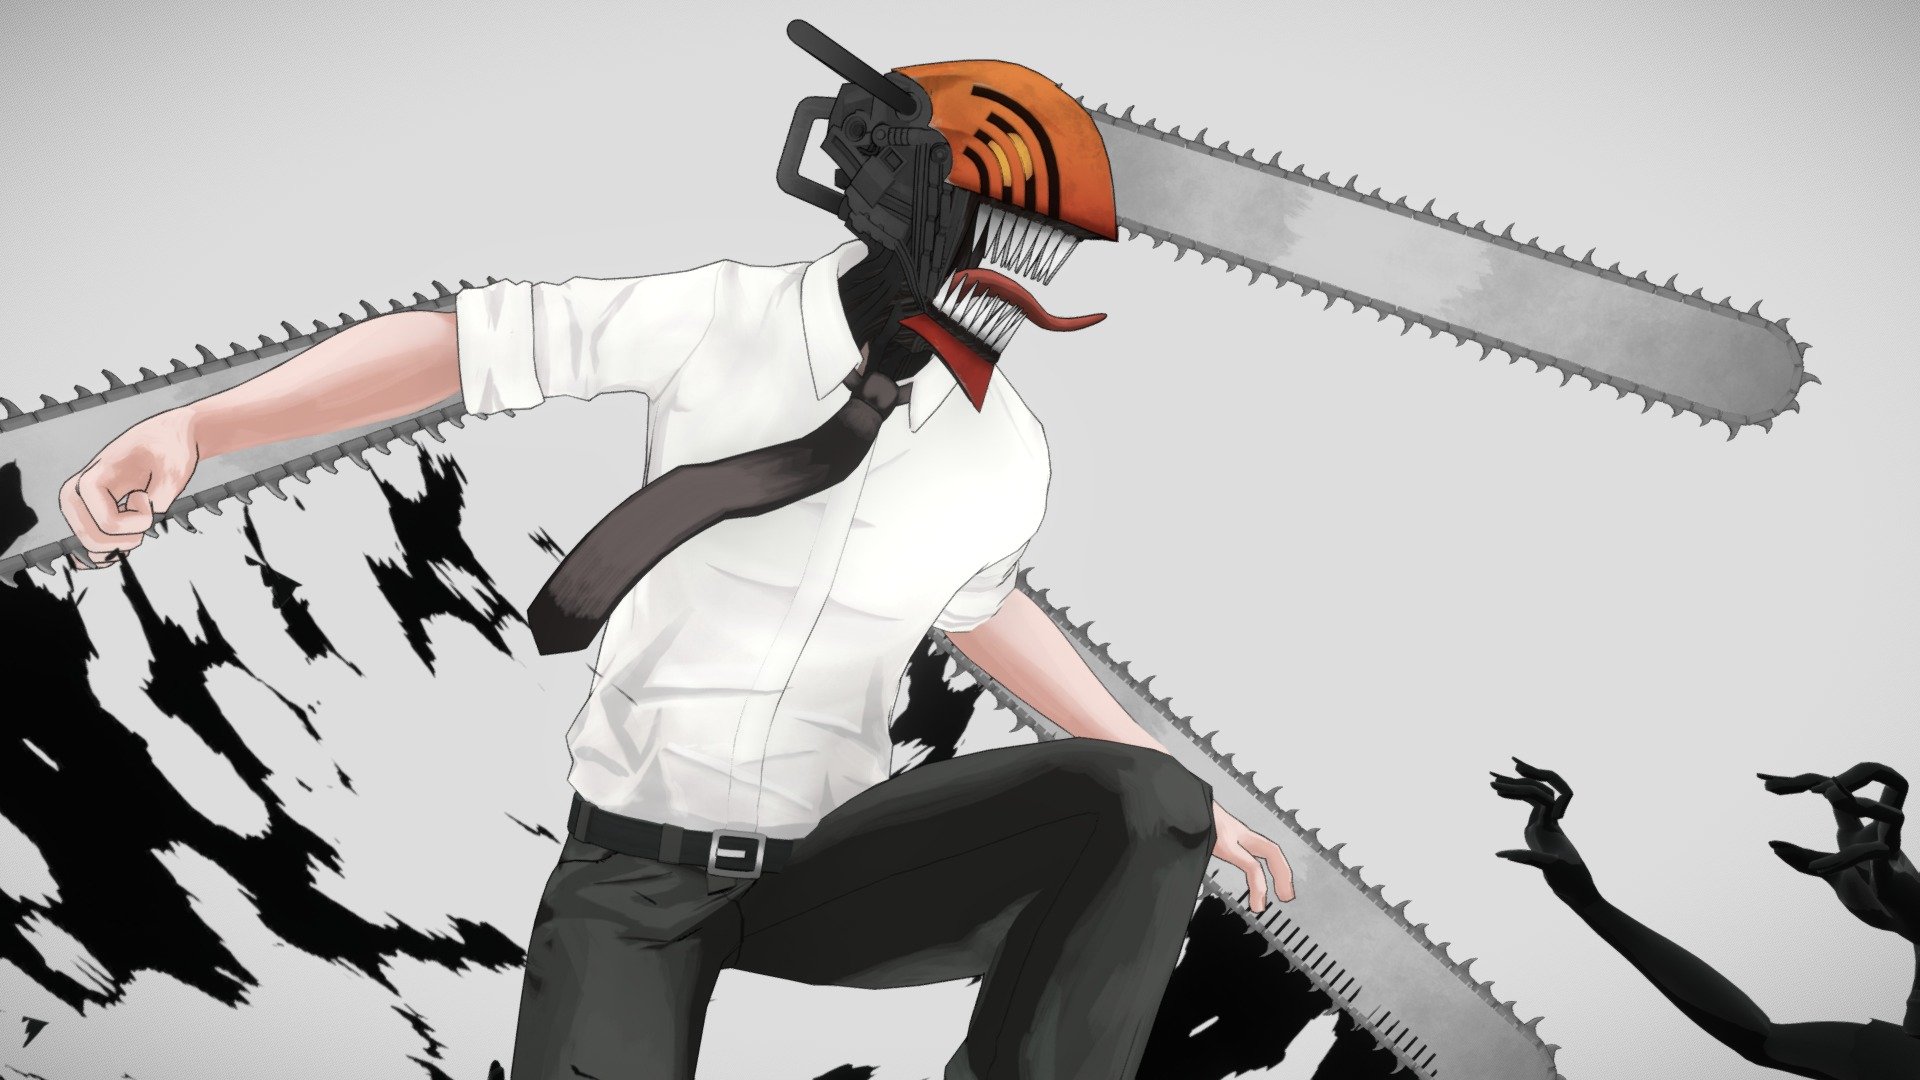 Who is Denji in Chainsaw Man?